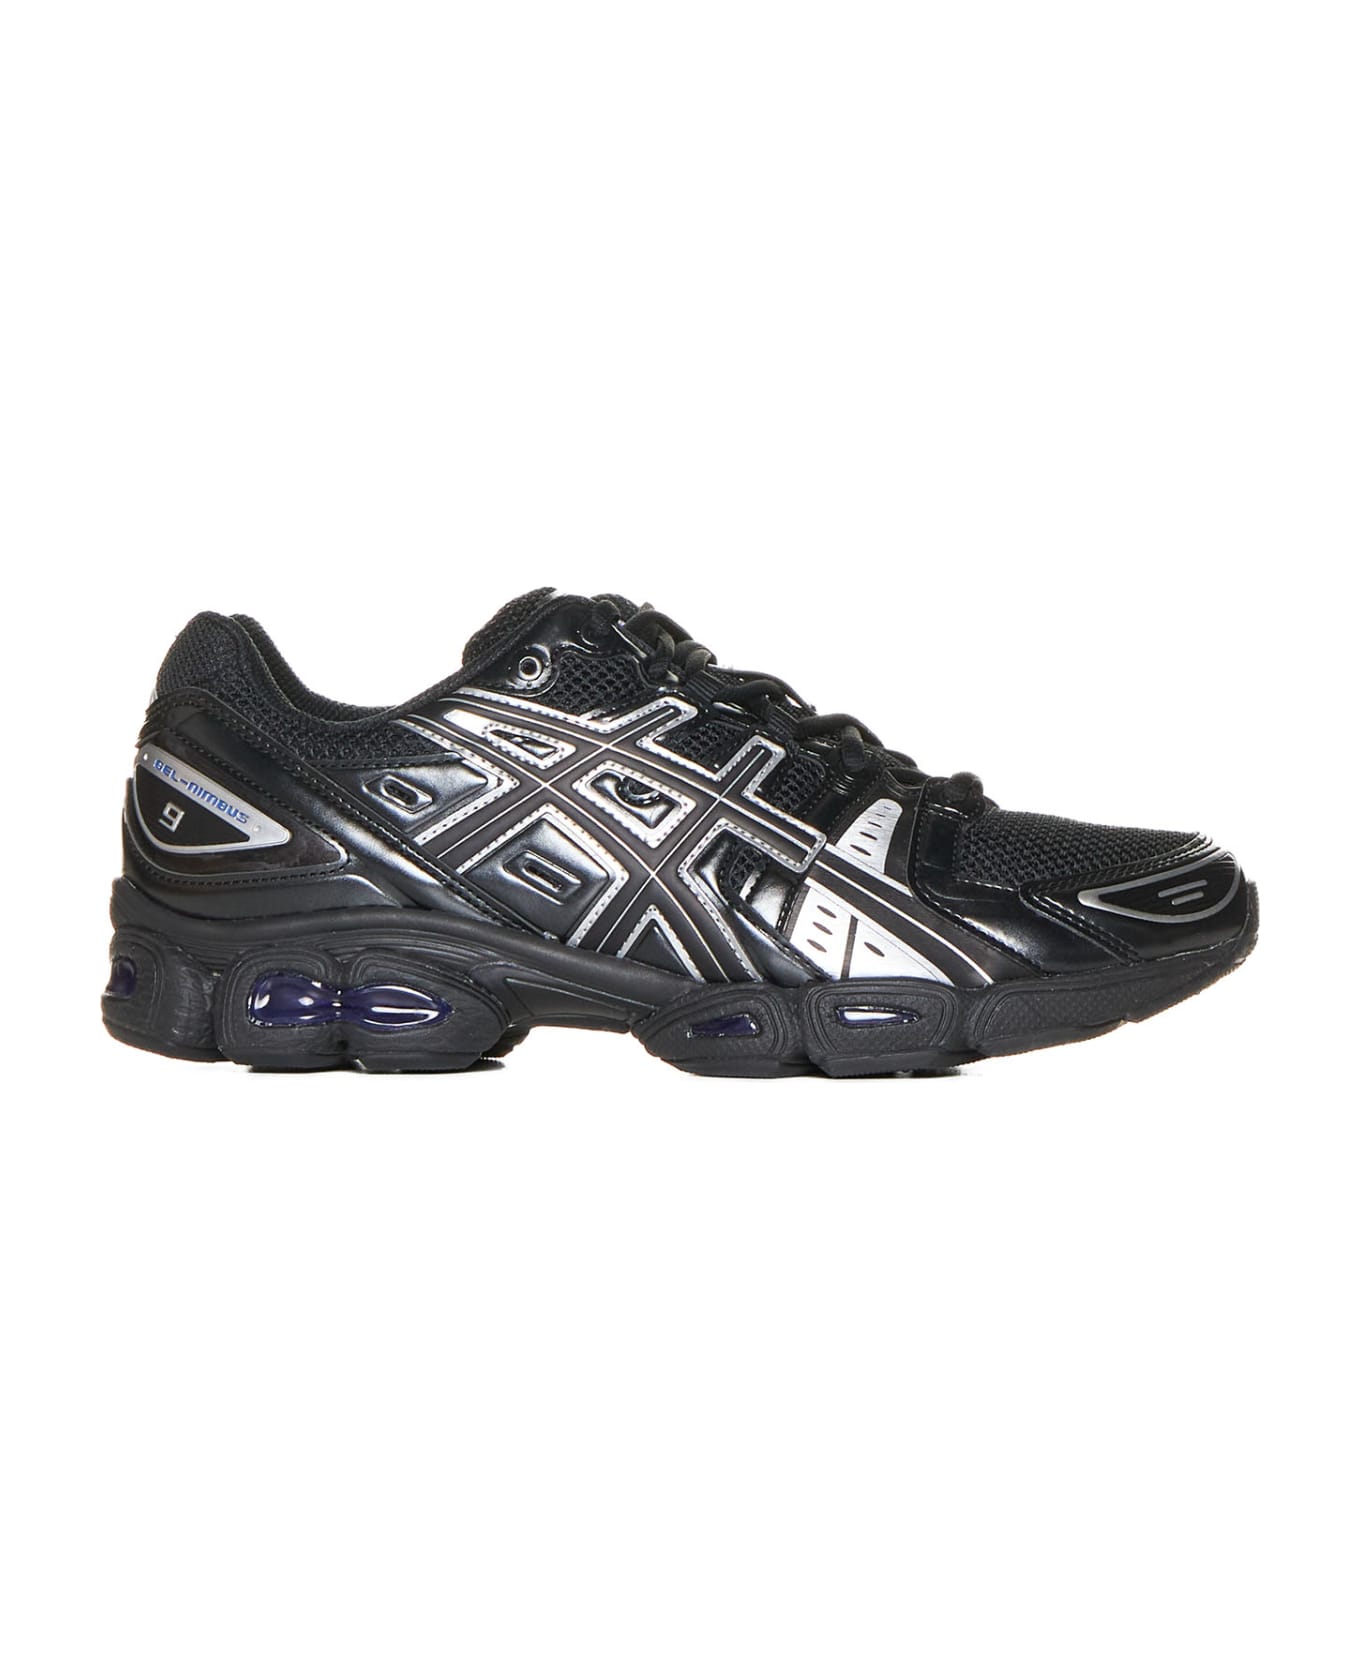 Asics Sneakers - Black/pure silver